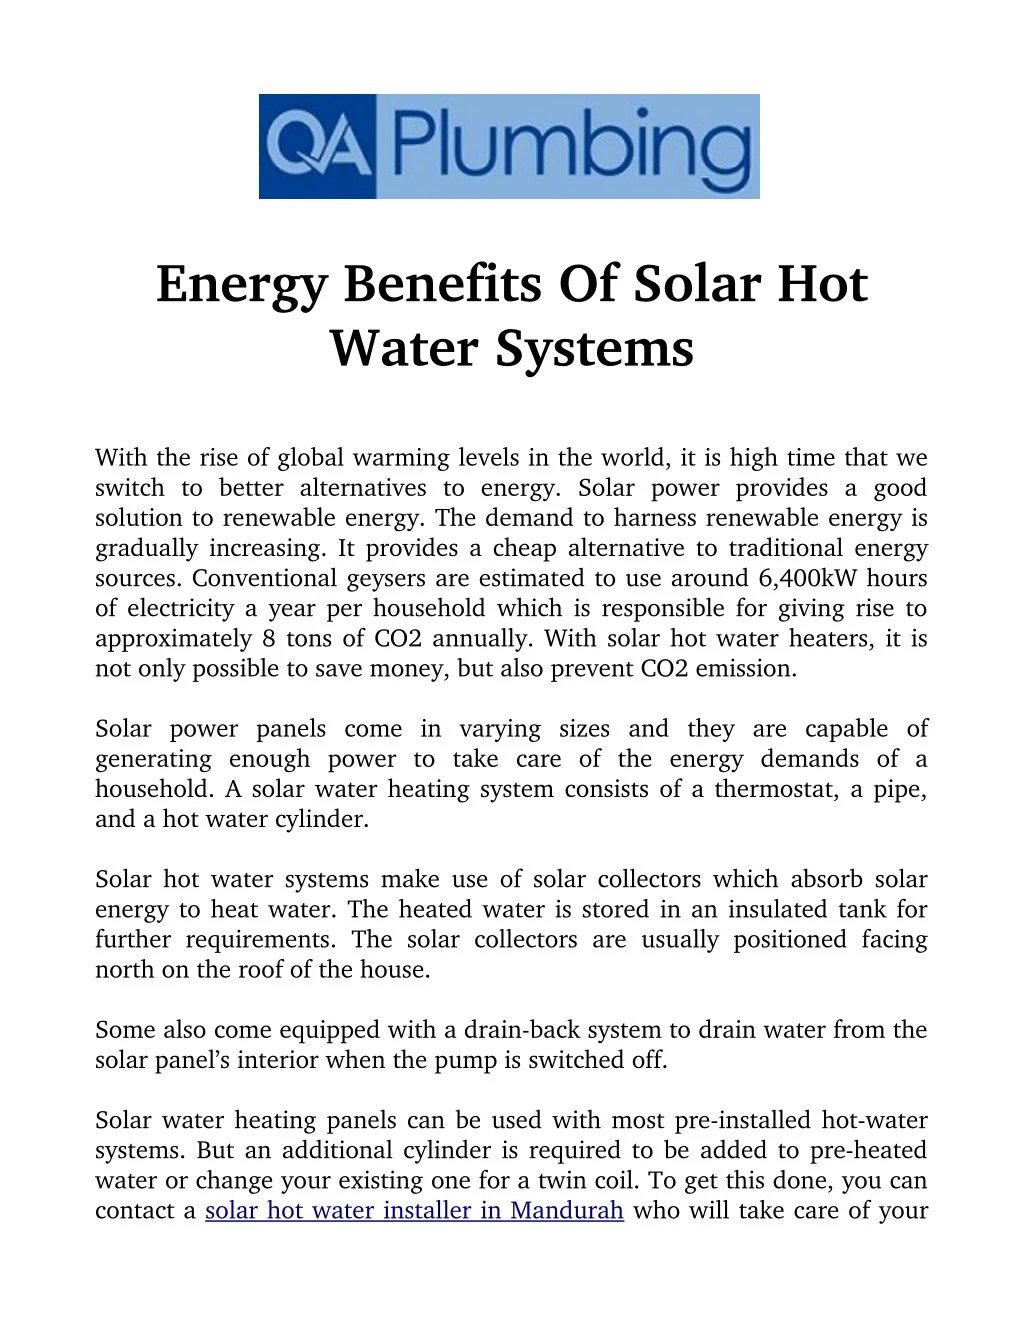 energy benefits of solar hot water systems